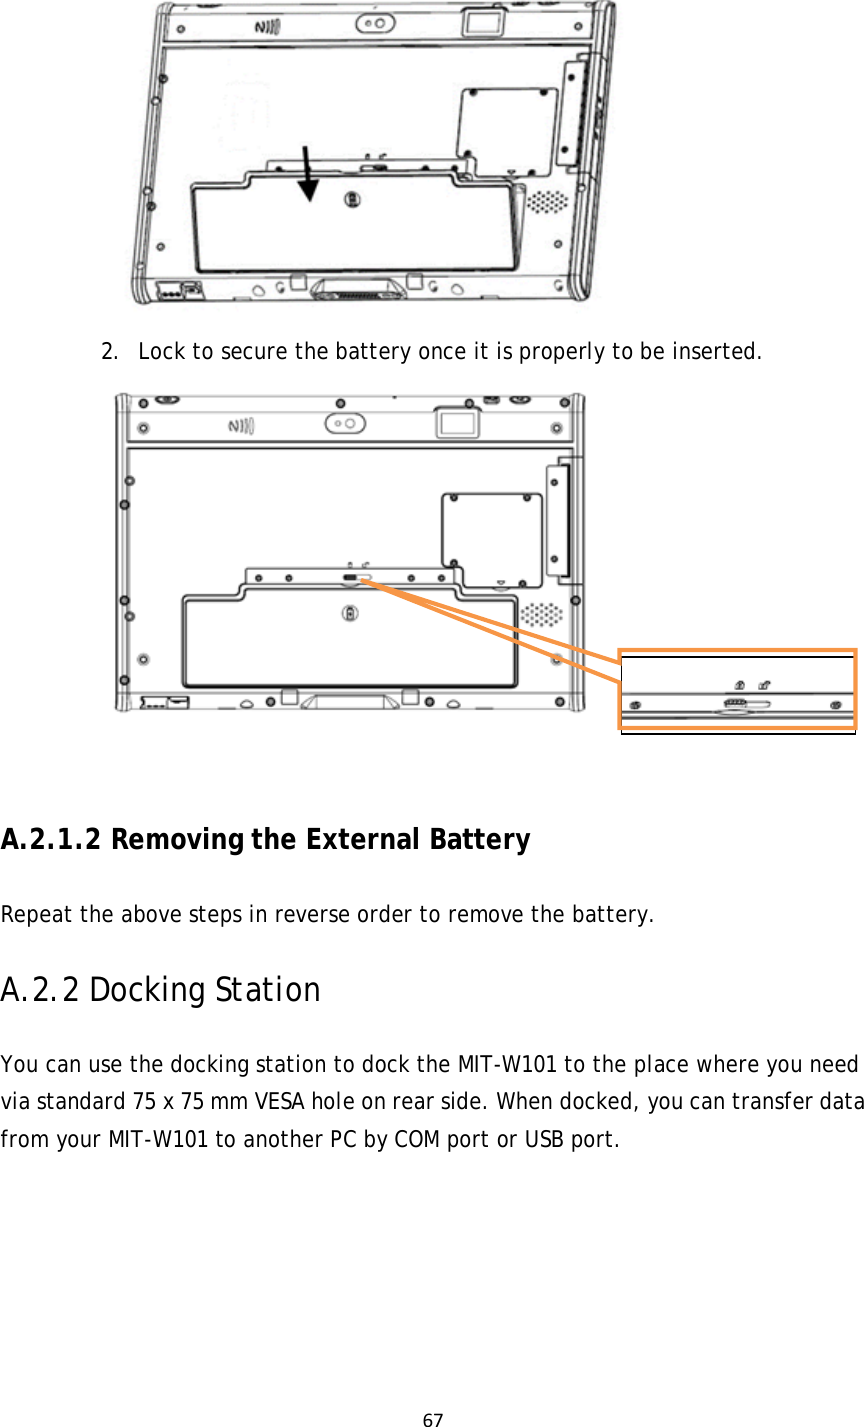 67 2. Lock to secure the battery once it is properly to be inserted.          A.2.1.2 Removing the External Battery Repeat the above steps in reverse order to remove the battery. A.2.2 Docking Station You can use the docking station to dock the MIT-W101 to the place where you need via standard 75 x 75 mm VESA hole on rear side. When docked, you can transfer data from your MIT-W101 to another PC by COM port or USB port.       